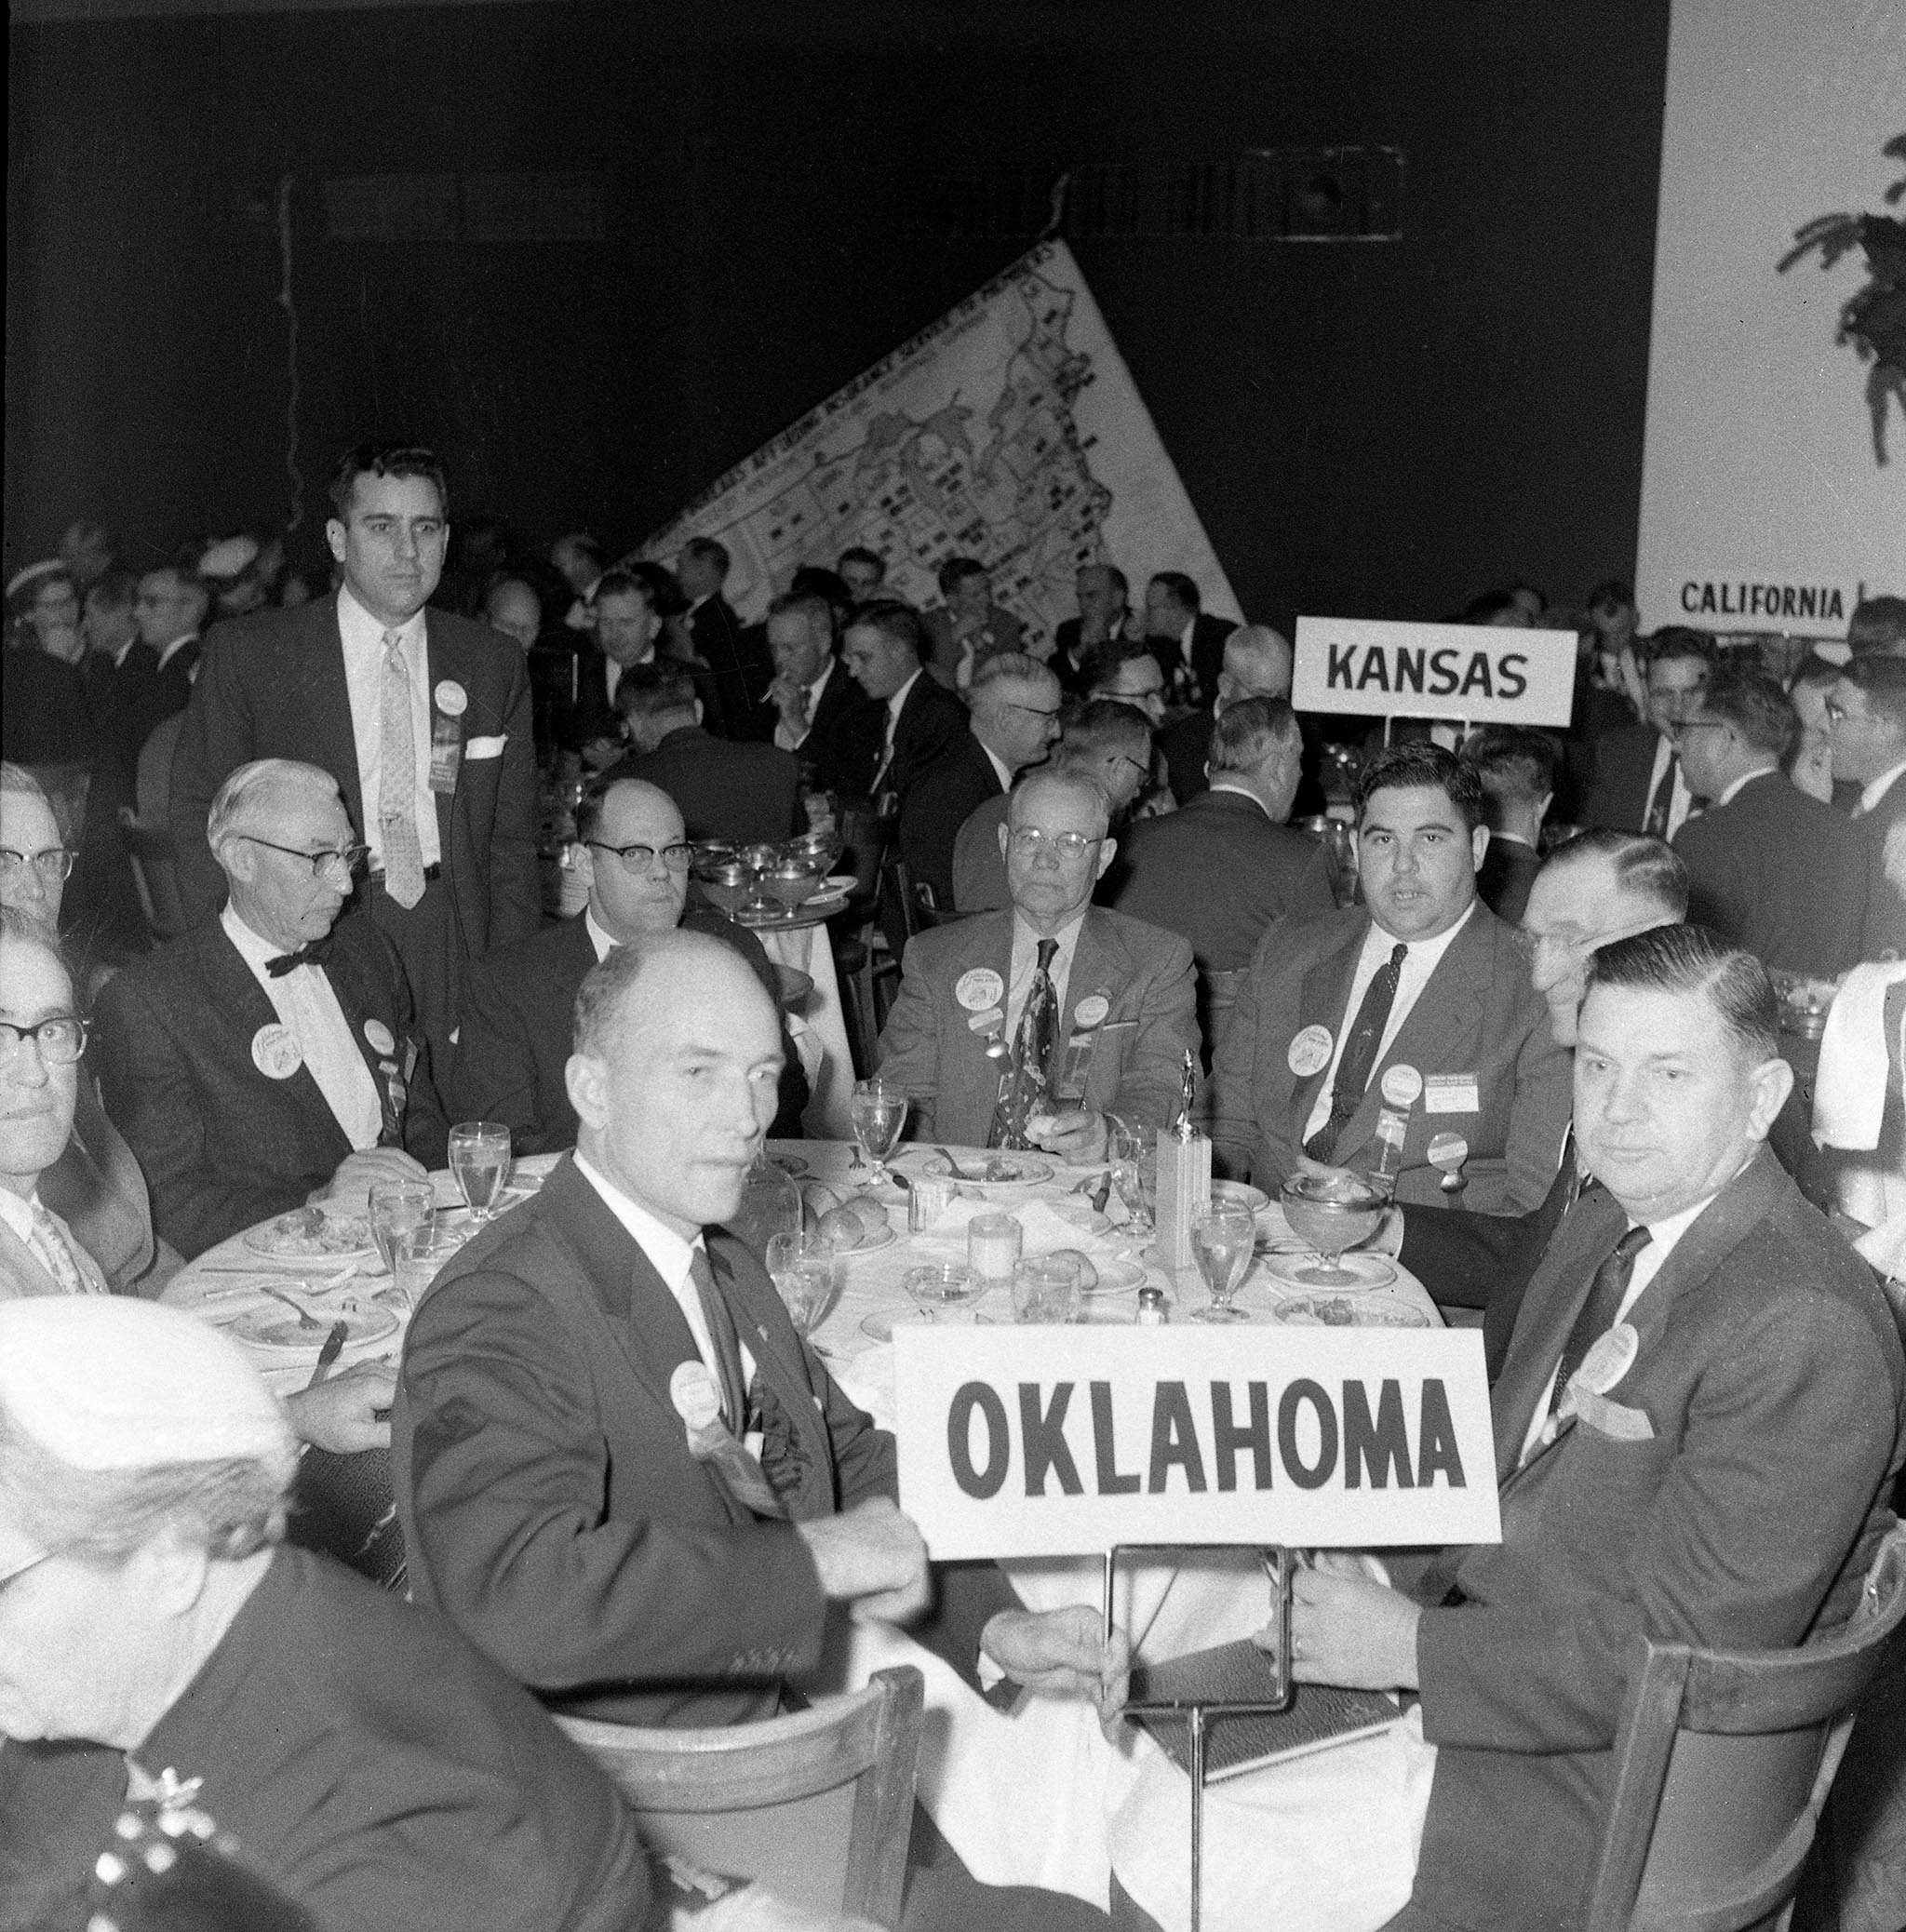 Forty-six Oklahomans attended the 37th annual meeting of the American Farm Bureau Federation in December 1955, including Oklahoma Farm Bureau’s four voting delegates: President Lewis H. Munn; Harold Davis, Roff; Mart Fowler, Stigler; and W.M. Deck, Balko. During the business session, delegates considered several resolutions concerning a variety of issues, including the Agricultural Act of 1954, the adoption of a “soil bank” policy to stockpile fertility in the soil for use in emergencies, states’ rights and more.